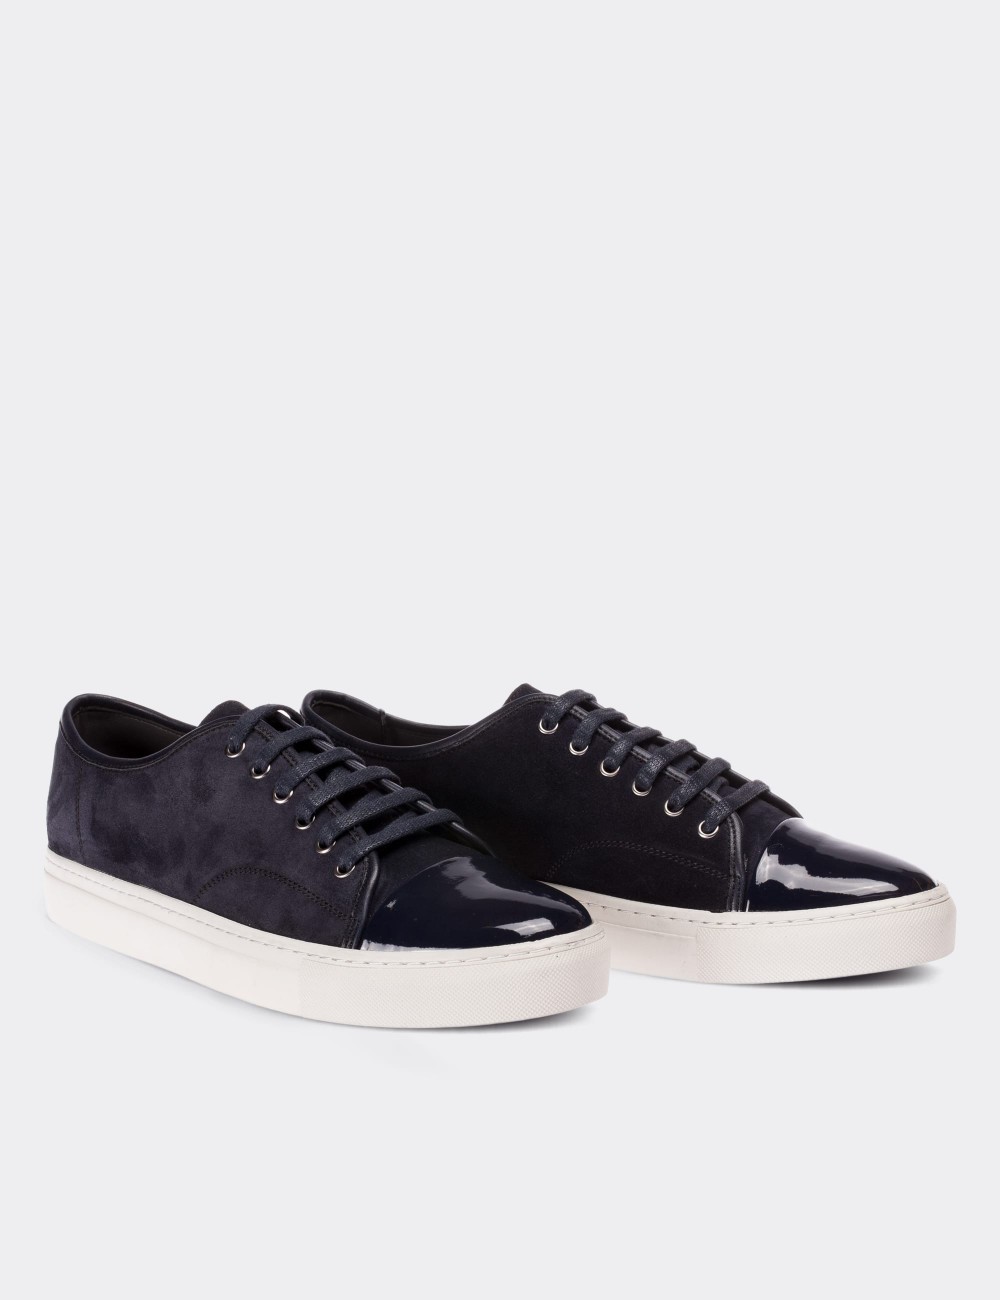 Navy Suede Leather  Sneakers - 01683MLCVC02